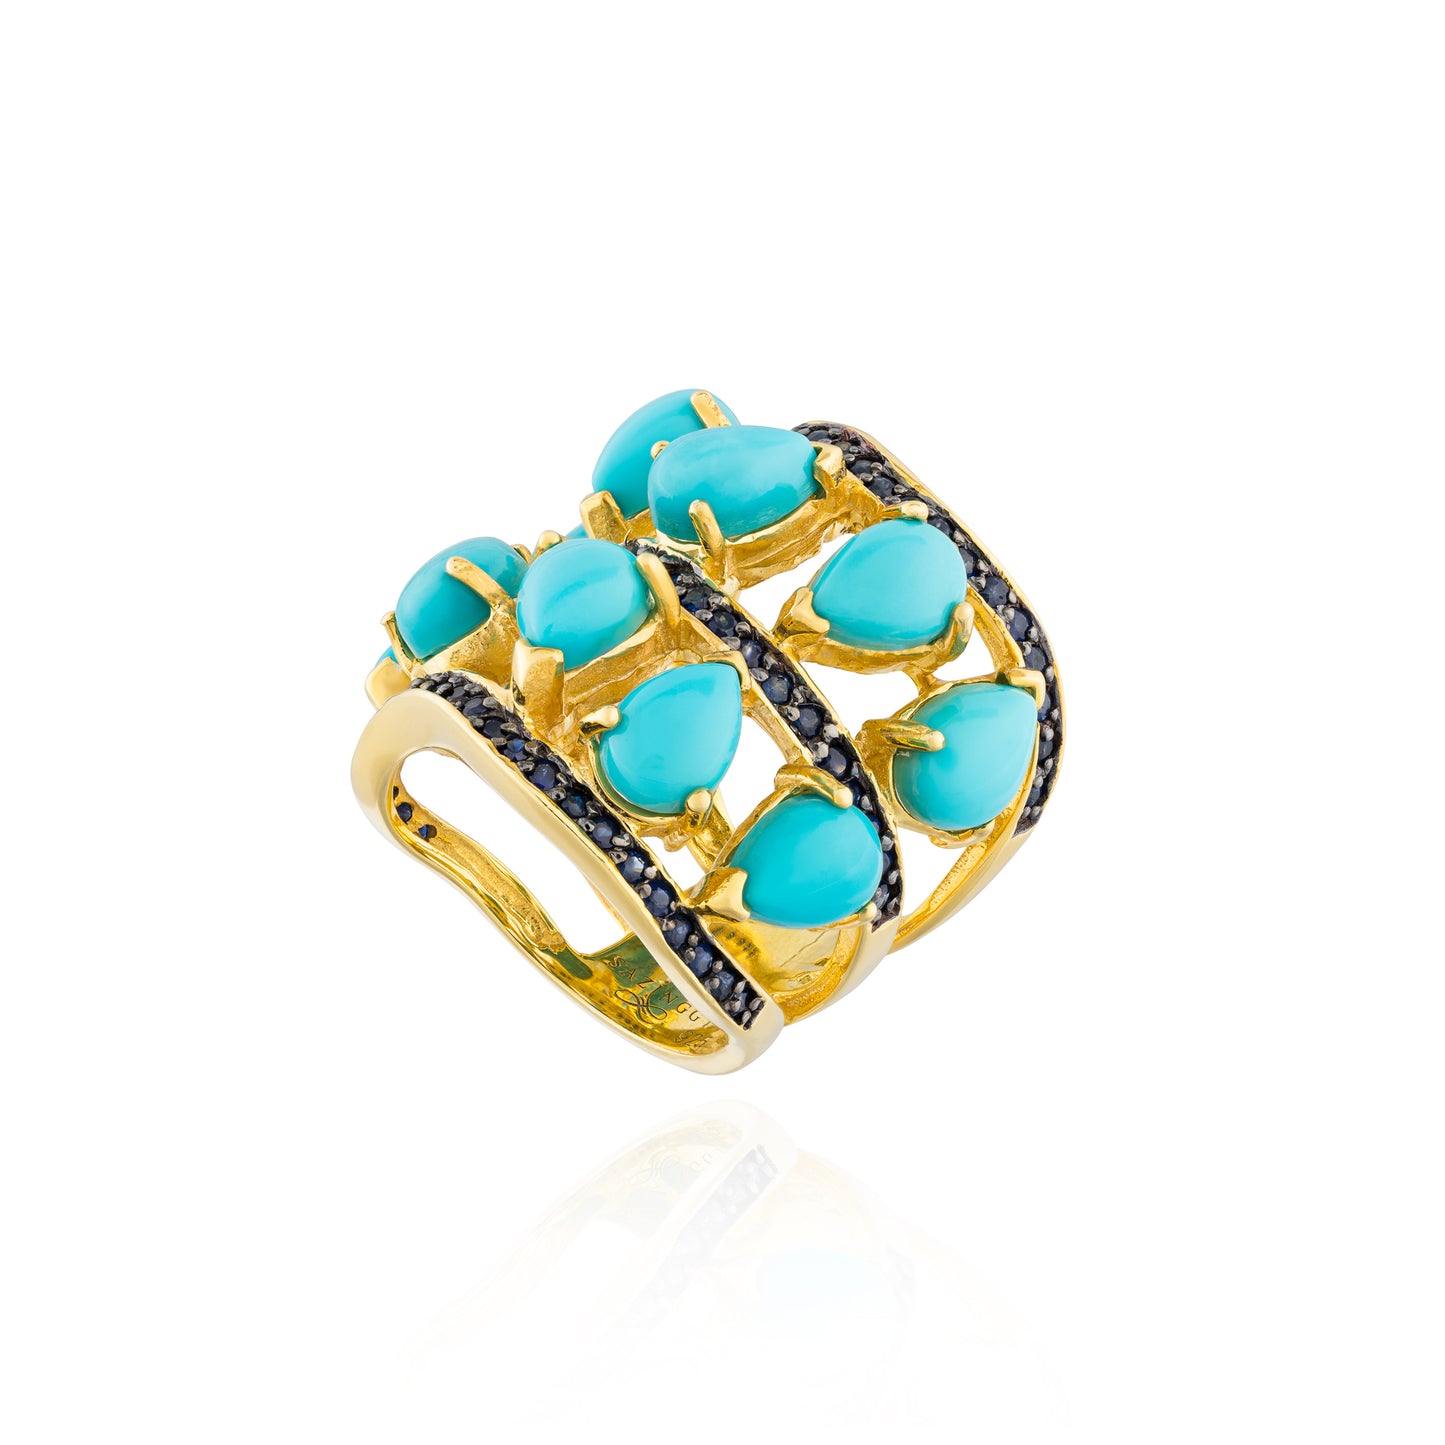 925 Silver Ring with Turquoise Cabochons & Sapphires